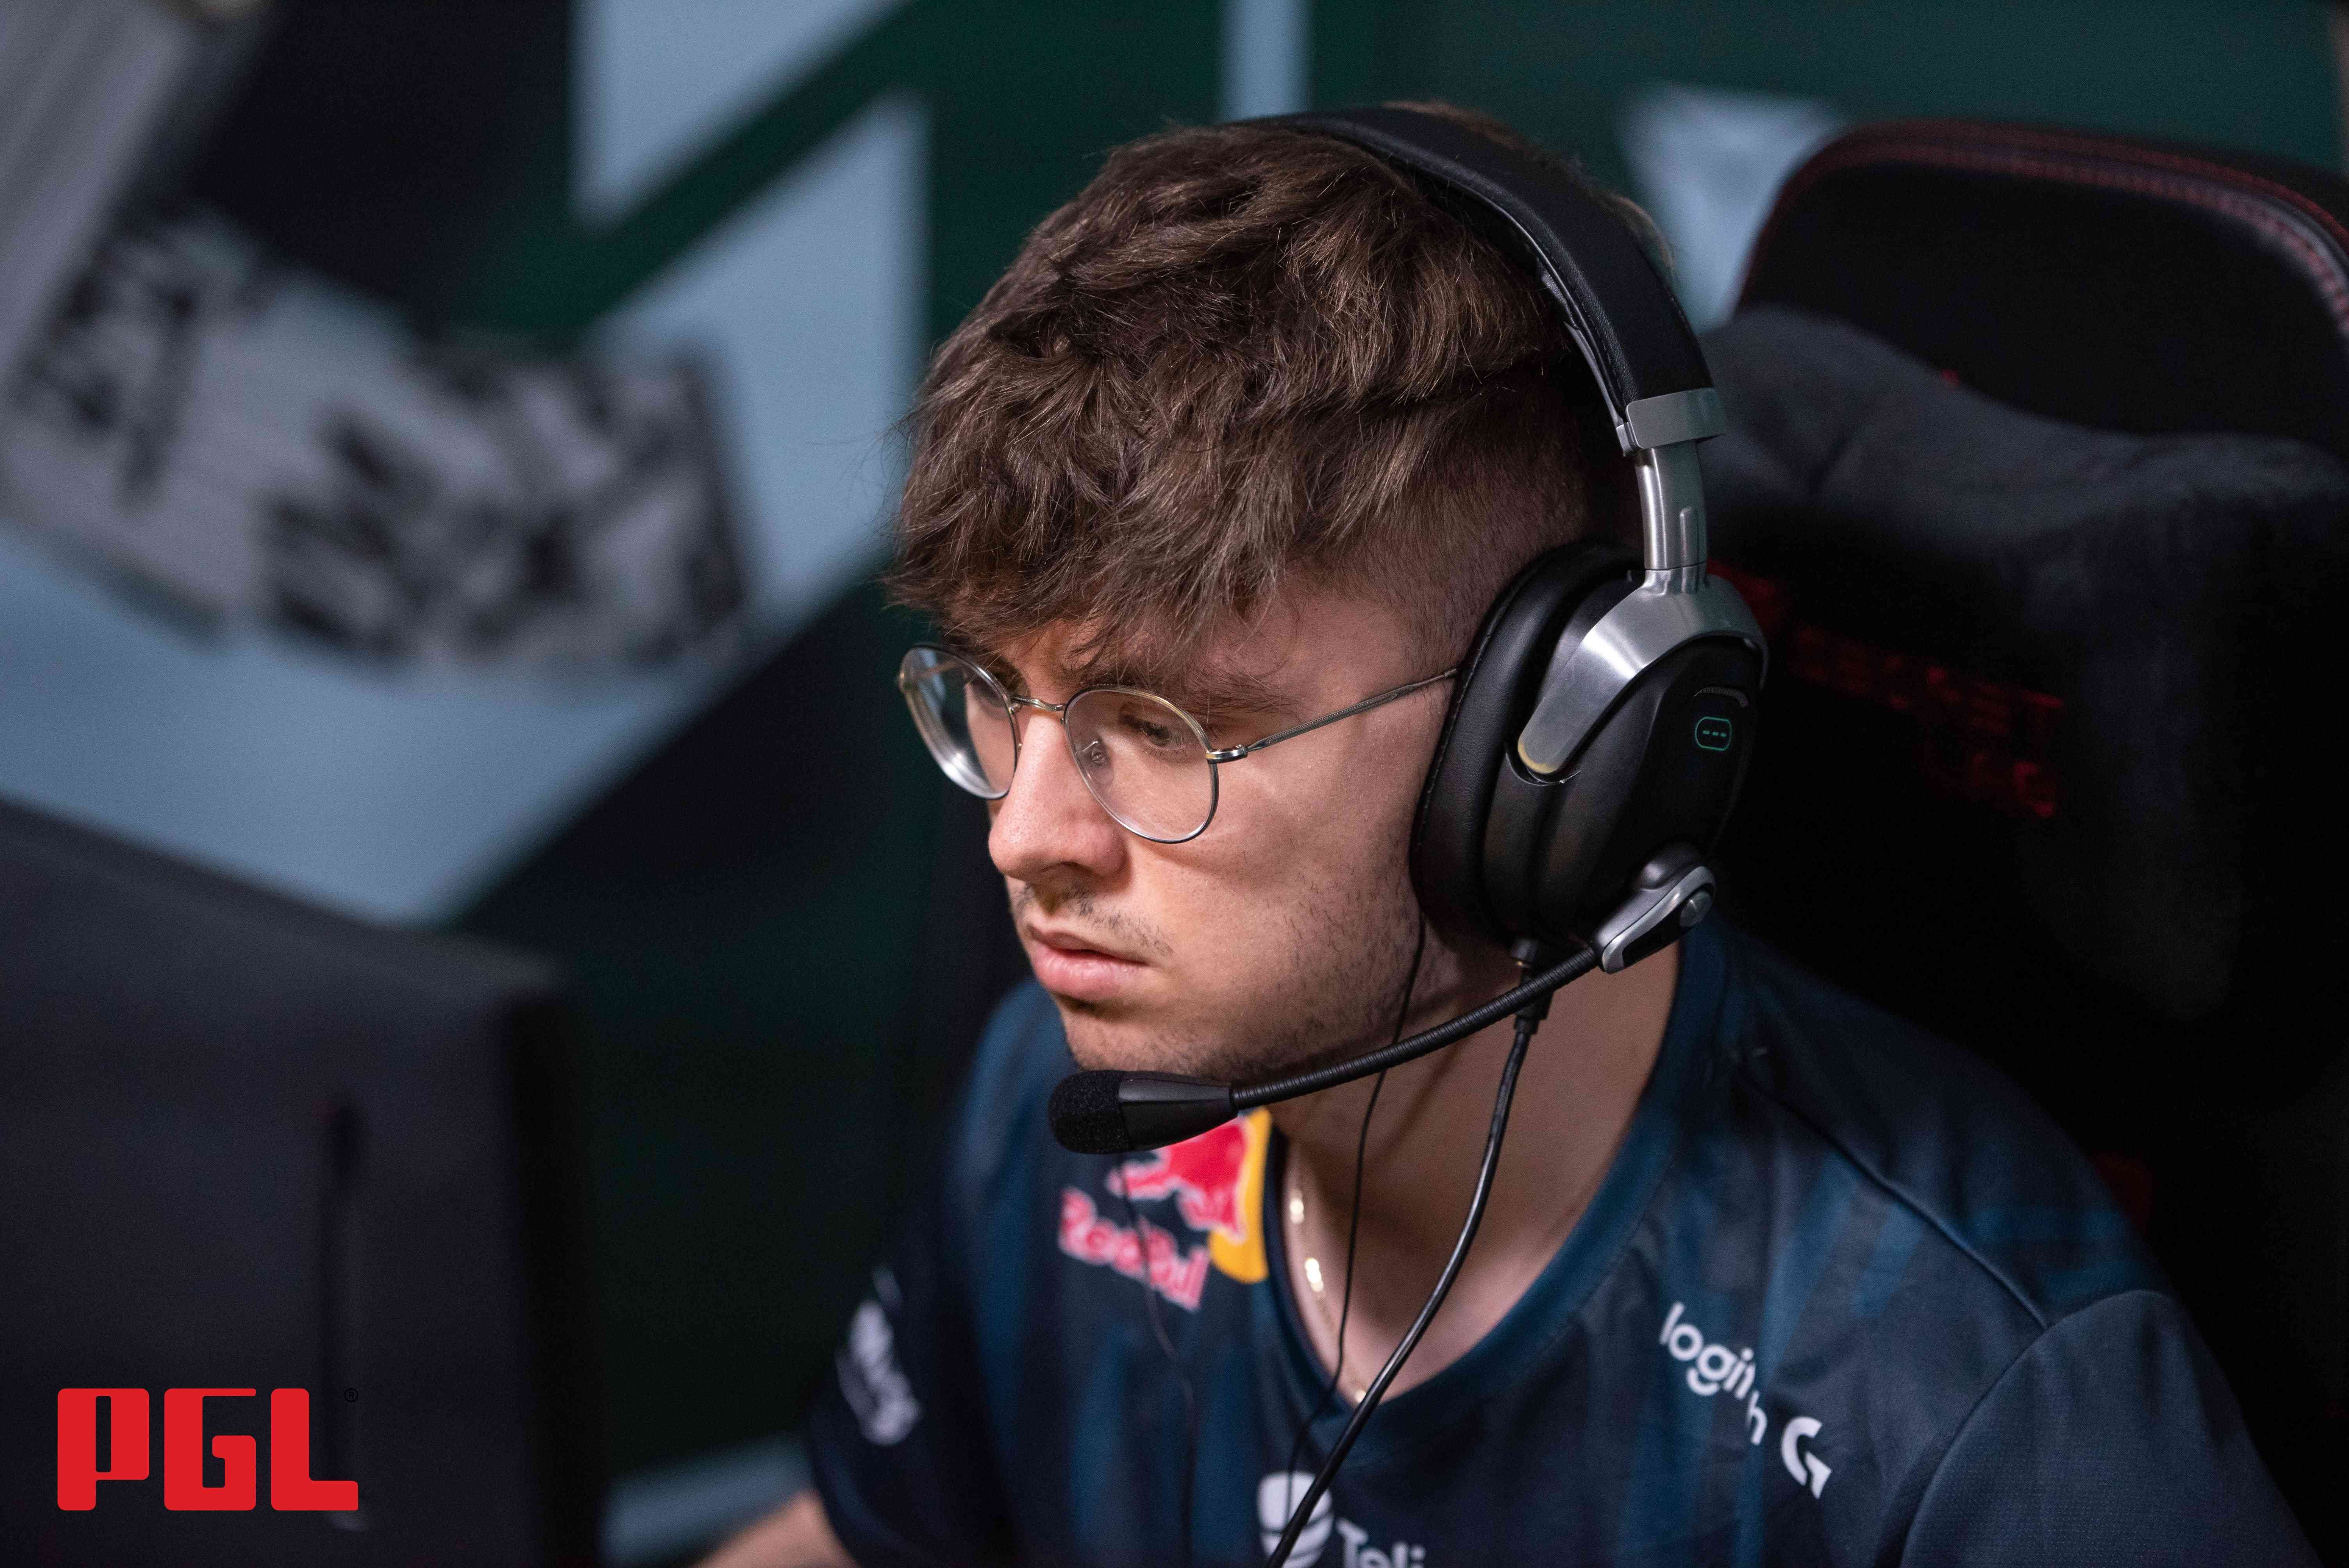 hades was the driving force behind 9INE’s successful run as he recorded 1.31 rating across 4 maps (Image: PGL)